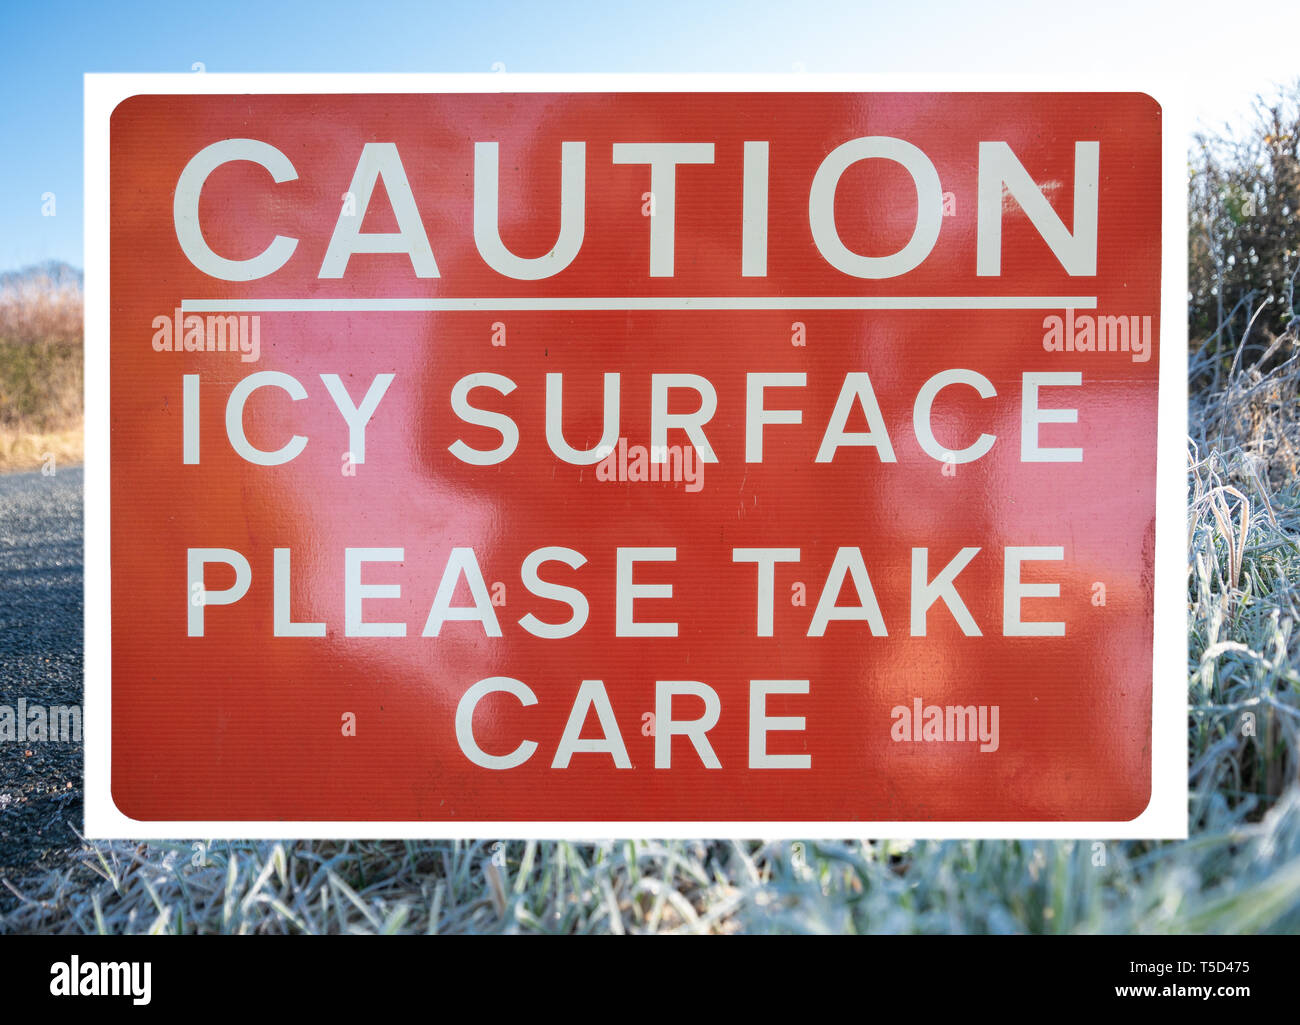 Caution Icy surface sign Stock Photo